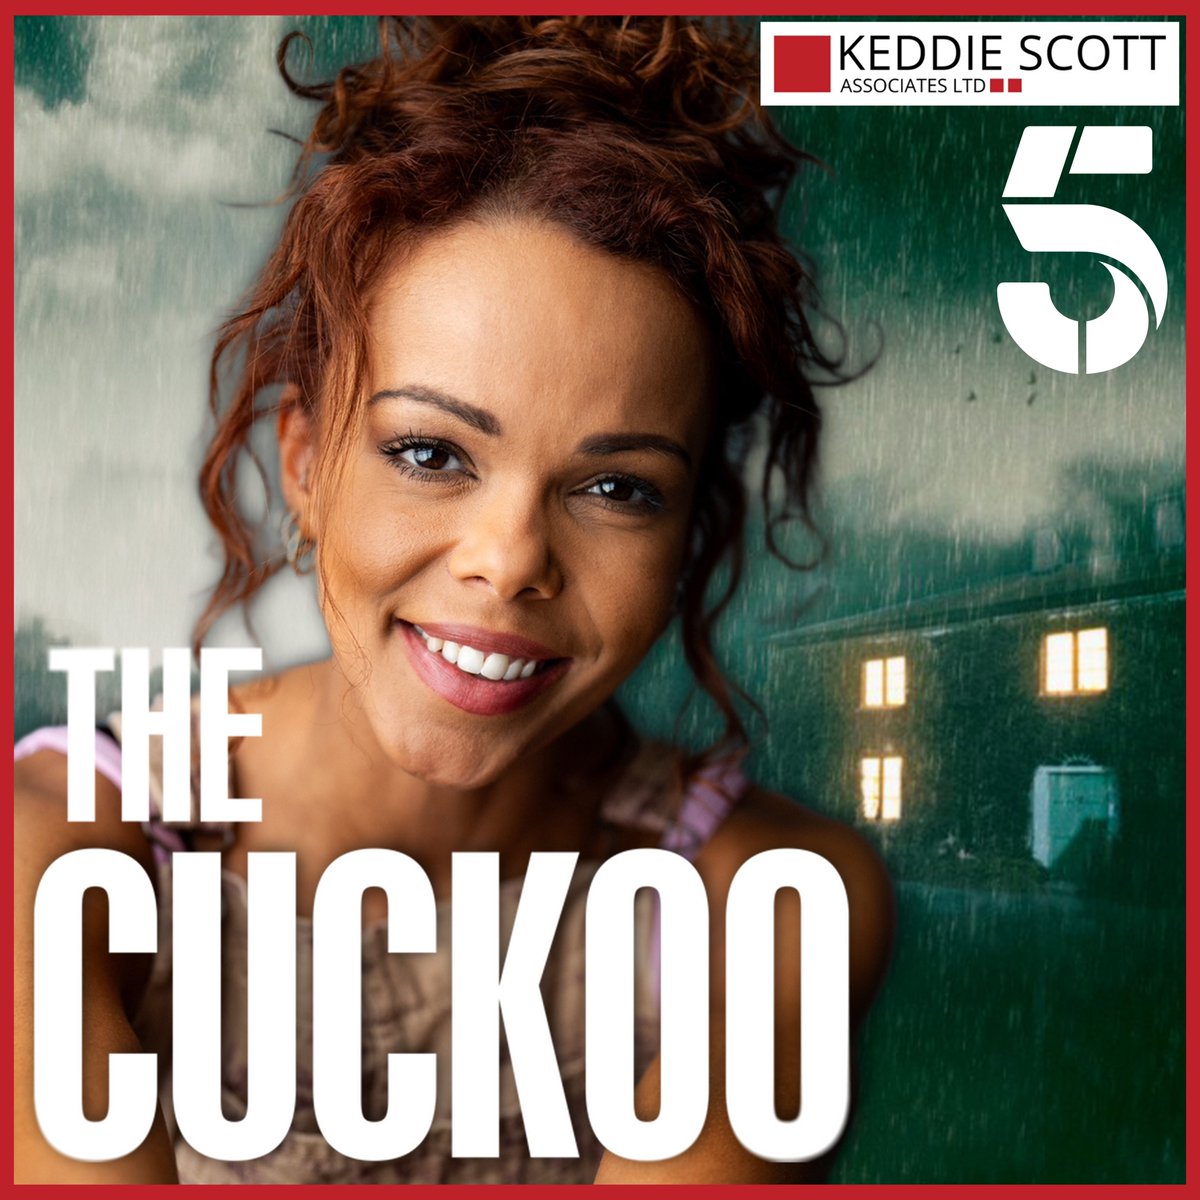 📺The gripping new drama series THE CUCKOO premiers tonight on @channel5_tv at 9pm. ⭐️COLLEEN KEOGH plays the role of DS Ibrahim. #SuperClients